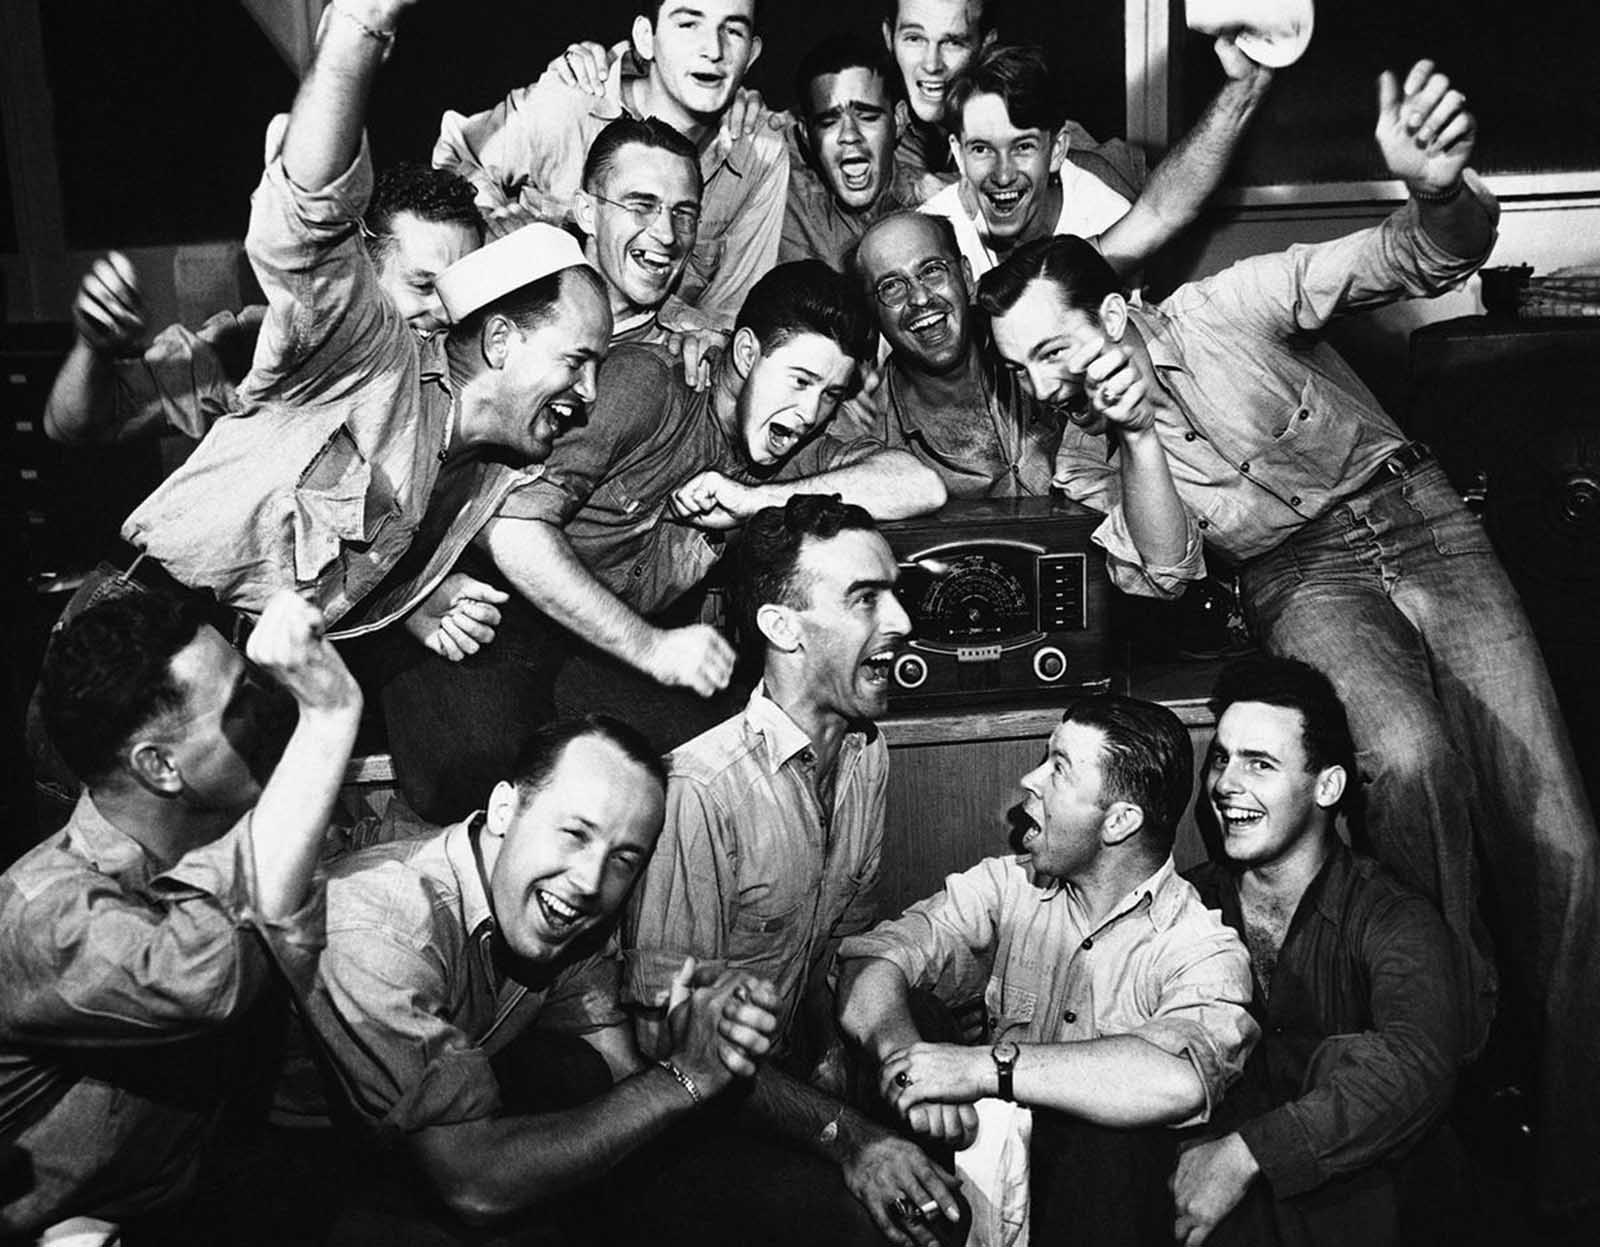 Sailors in Pearl Harbor, Hawaii listen to radio and cheer as Tokyo radio states Japan has accepted the Potsdam surrender terms on August 15, 1945.